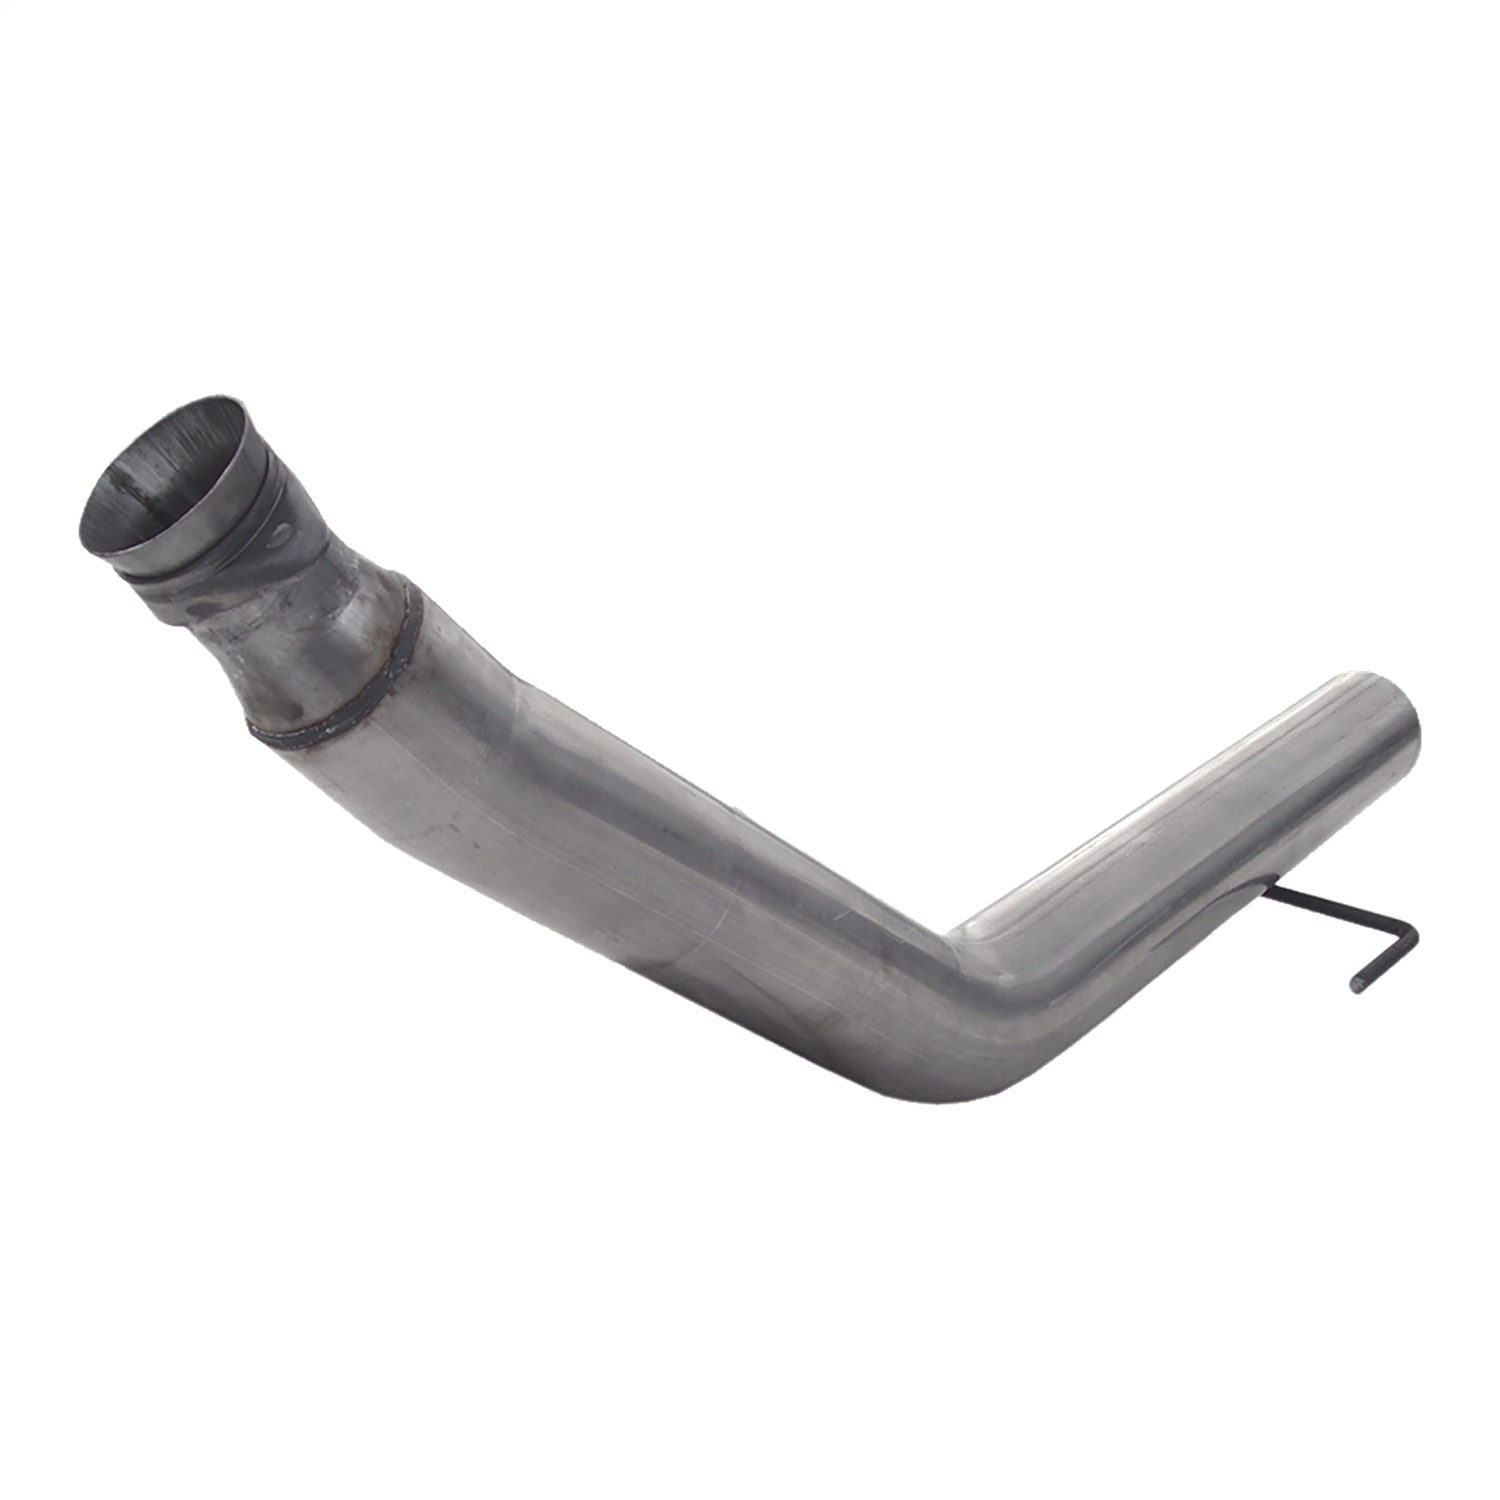 MBRP Exhaust MBRP Exhaust DAL401 Down Pipe Fits 94-02 Ram 2500 Ram 3500